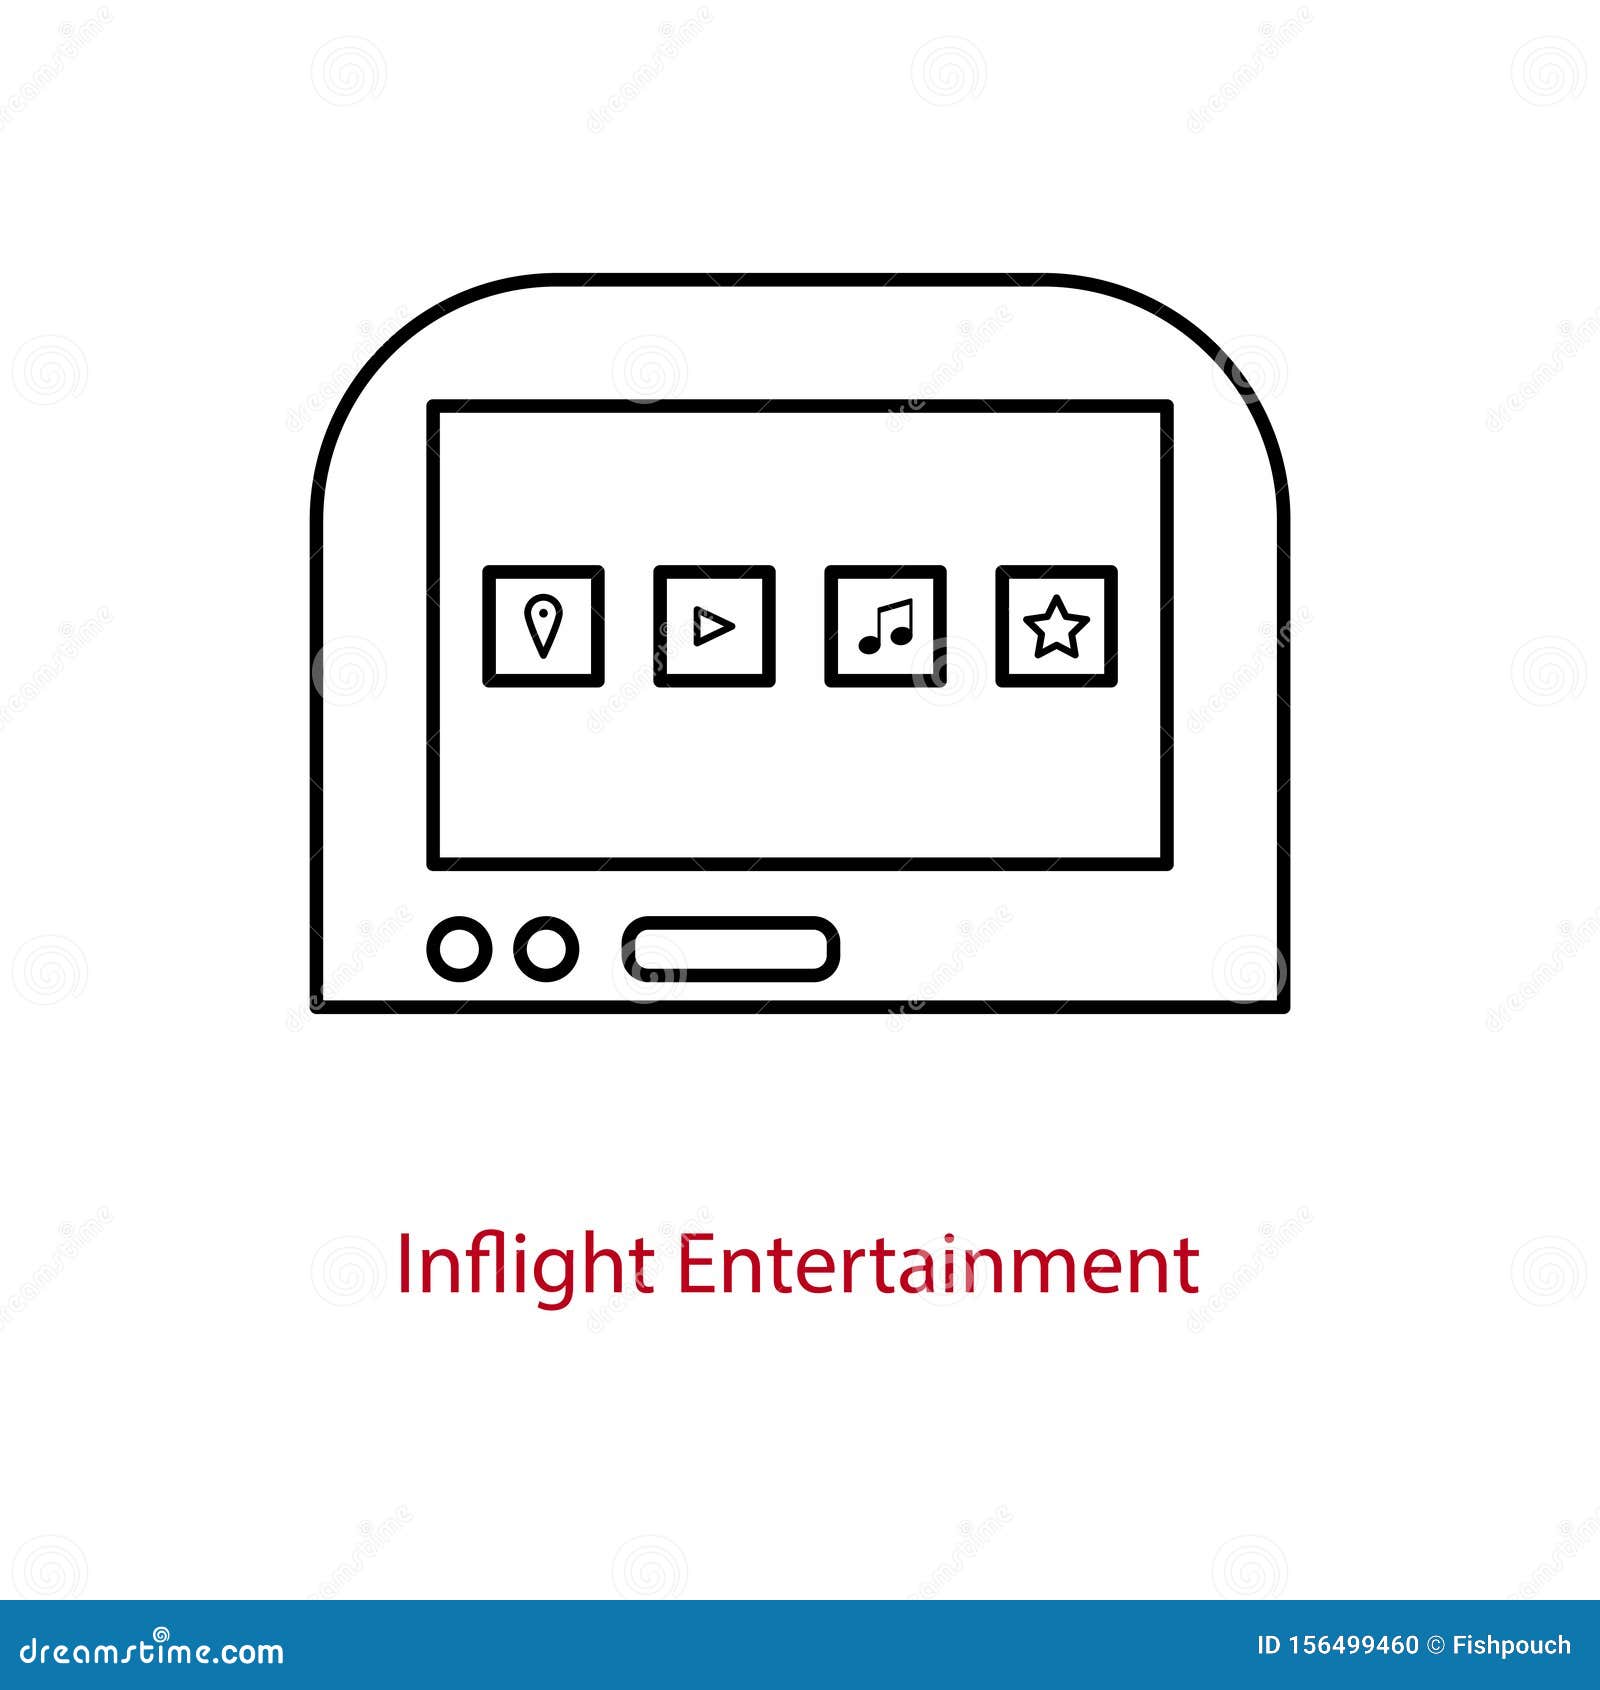 inflight entertainment screen icon on an airplane seatback.